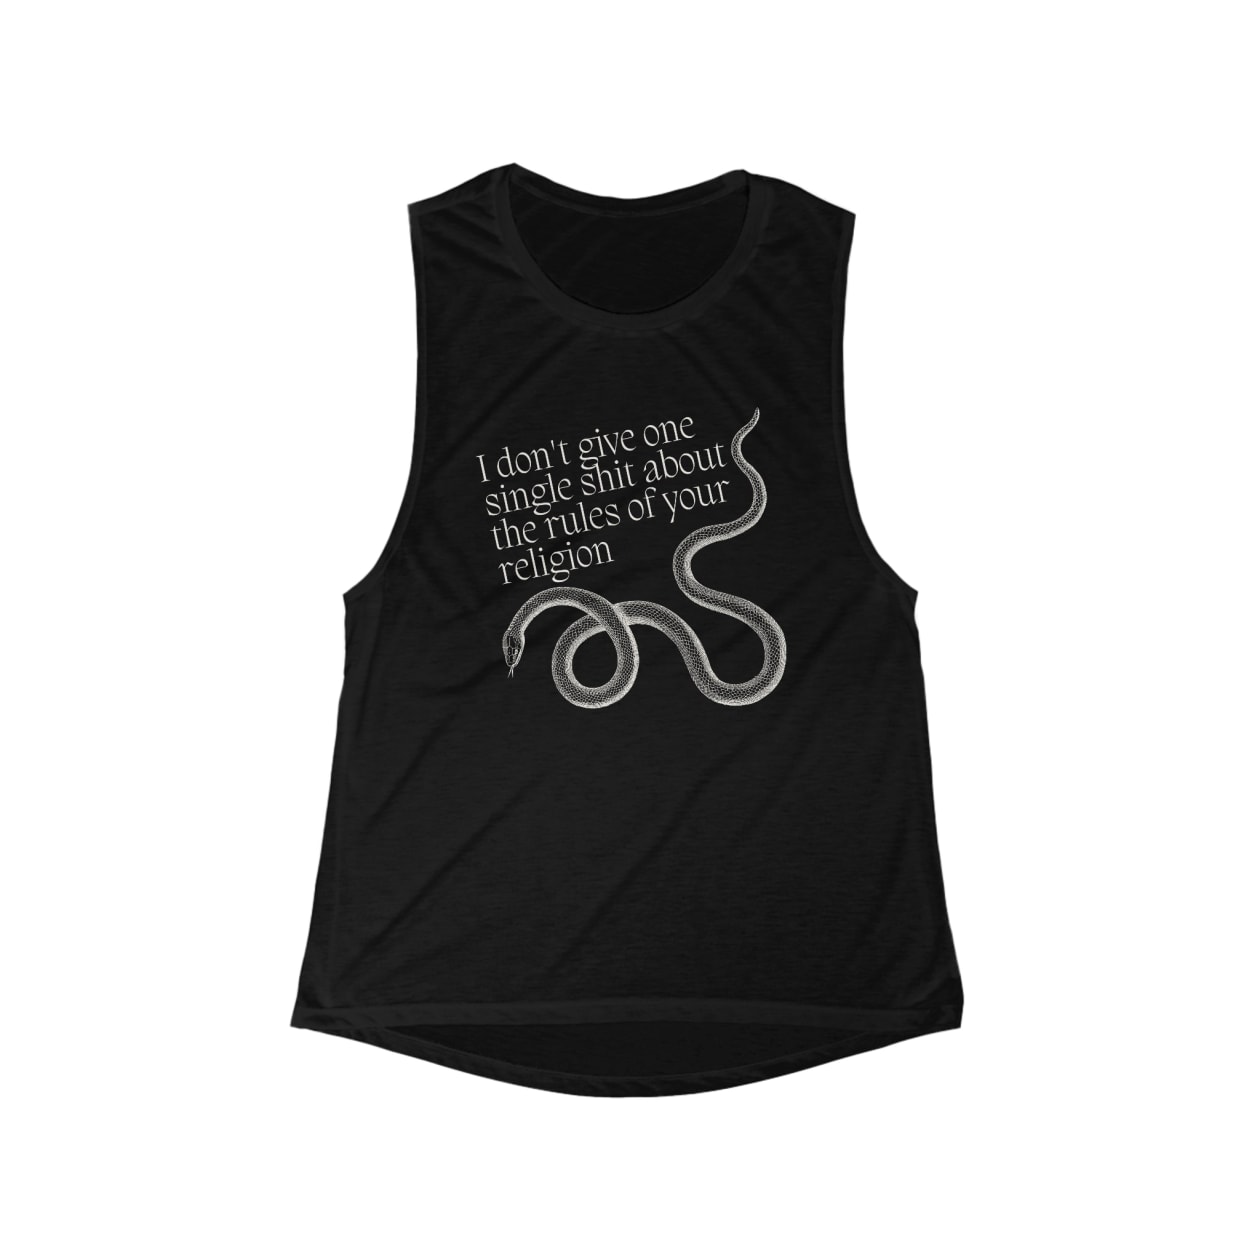 I Don't Give One Single Sh*t About the Rules of Your Religion Women's Flowy Scoop Muscle Tank in Snake Motif - Color: Black, Size: S